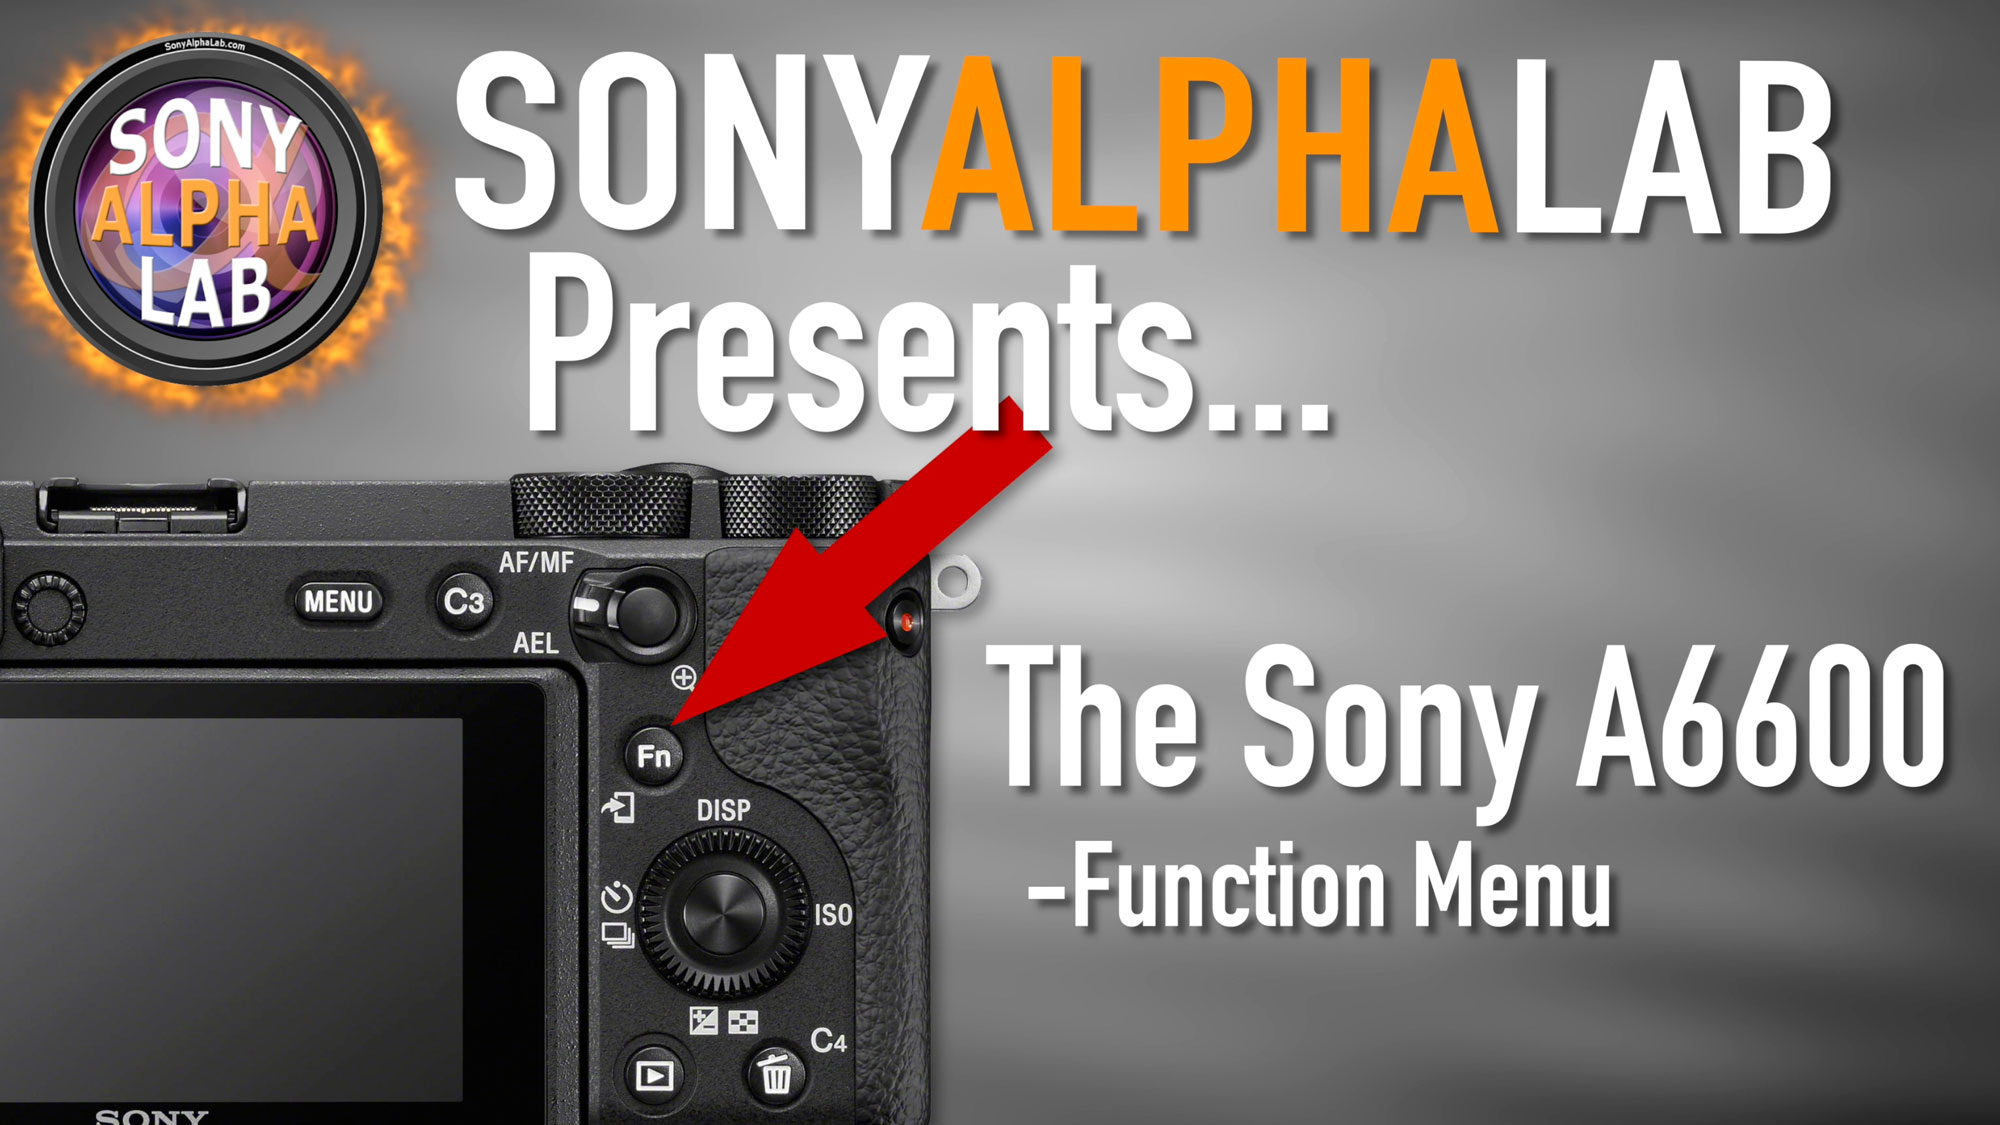 Sony A6600 and The Function Menu (Fn) - How To Use and Customize...